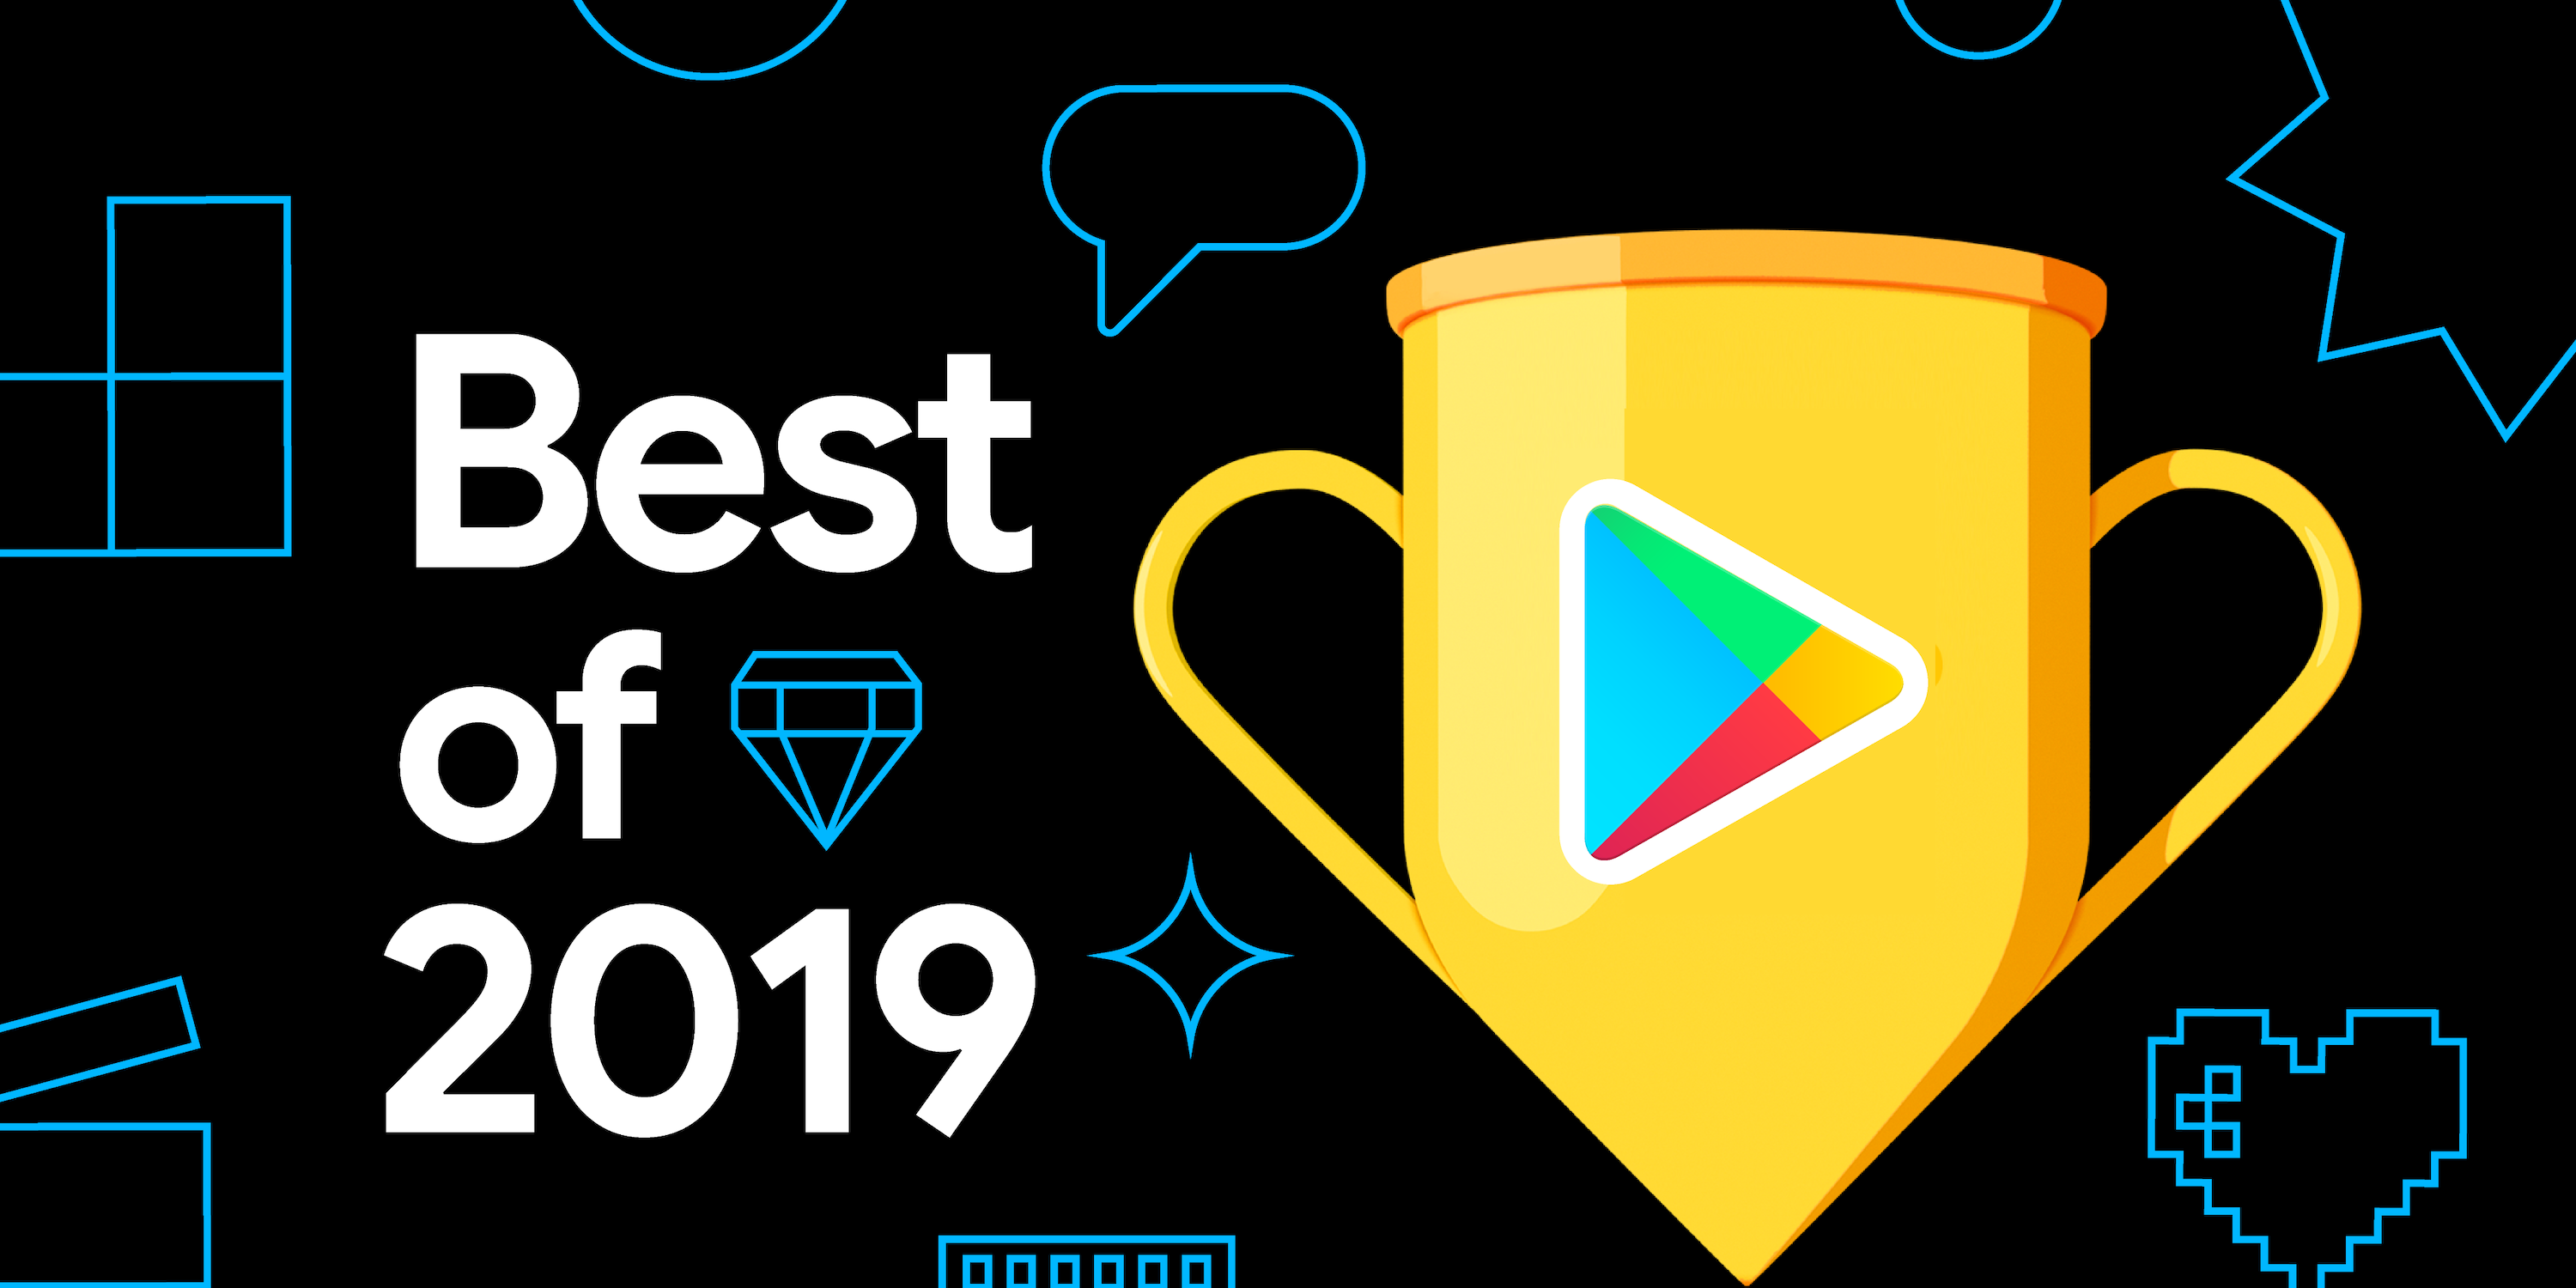 Google Play Reveals Best Apps Games And Movies Of 2019 9to5google